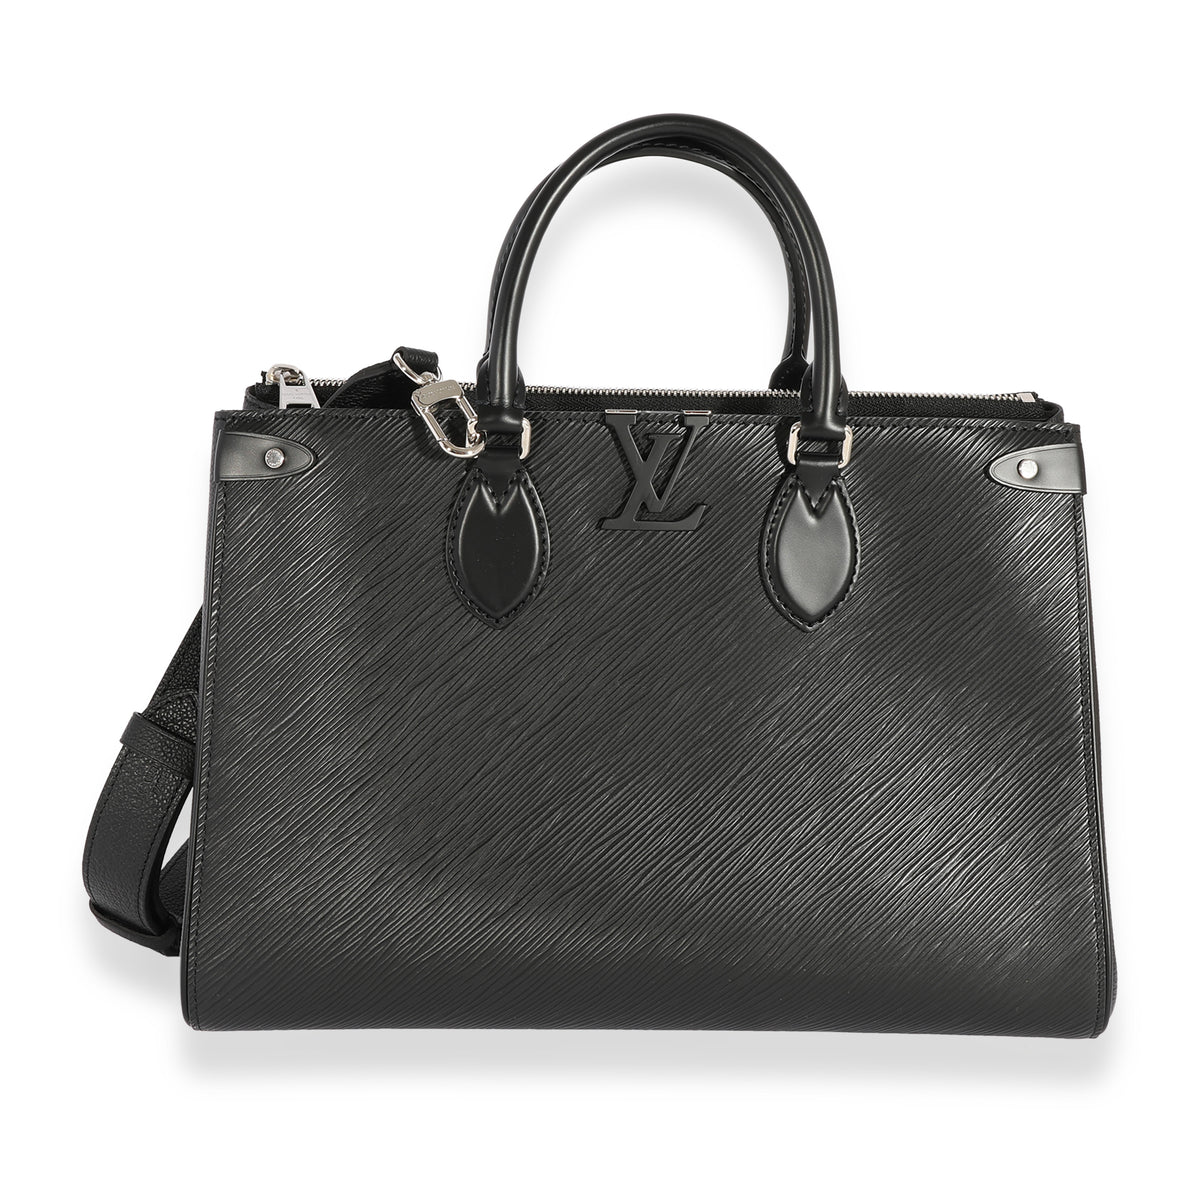 LOUIS VUITTON EPI LEATHER GRENELLE TOTE BAG MM